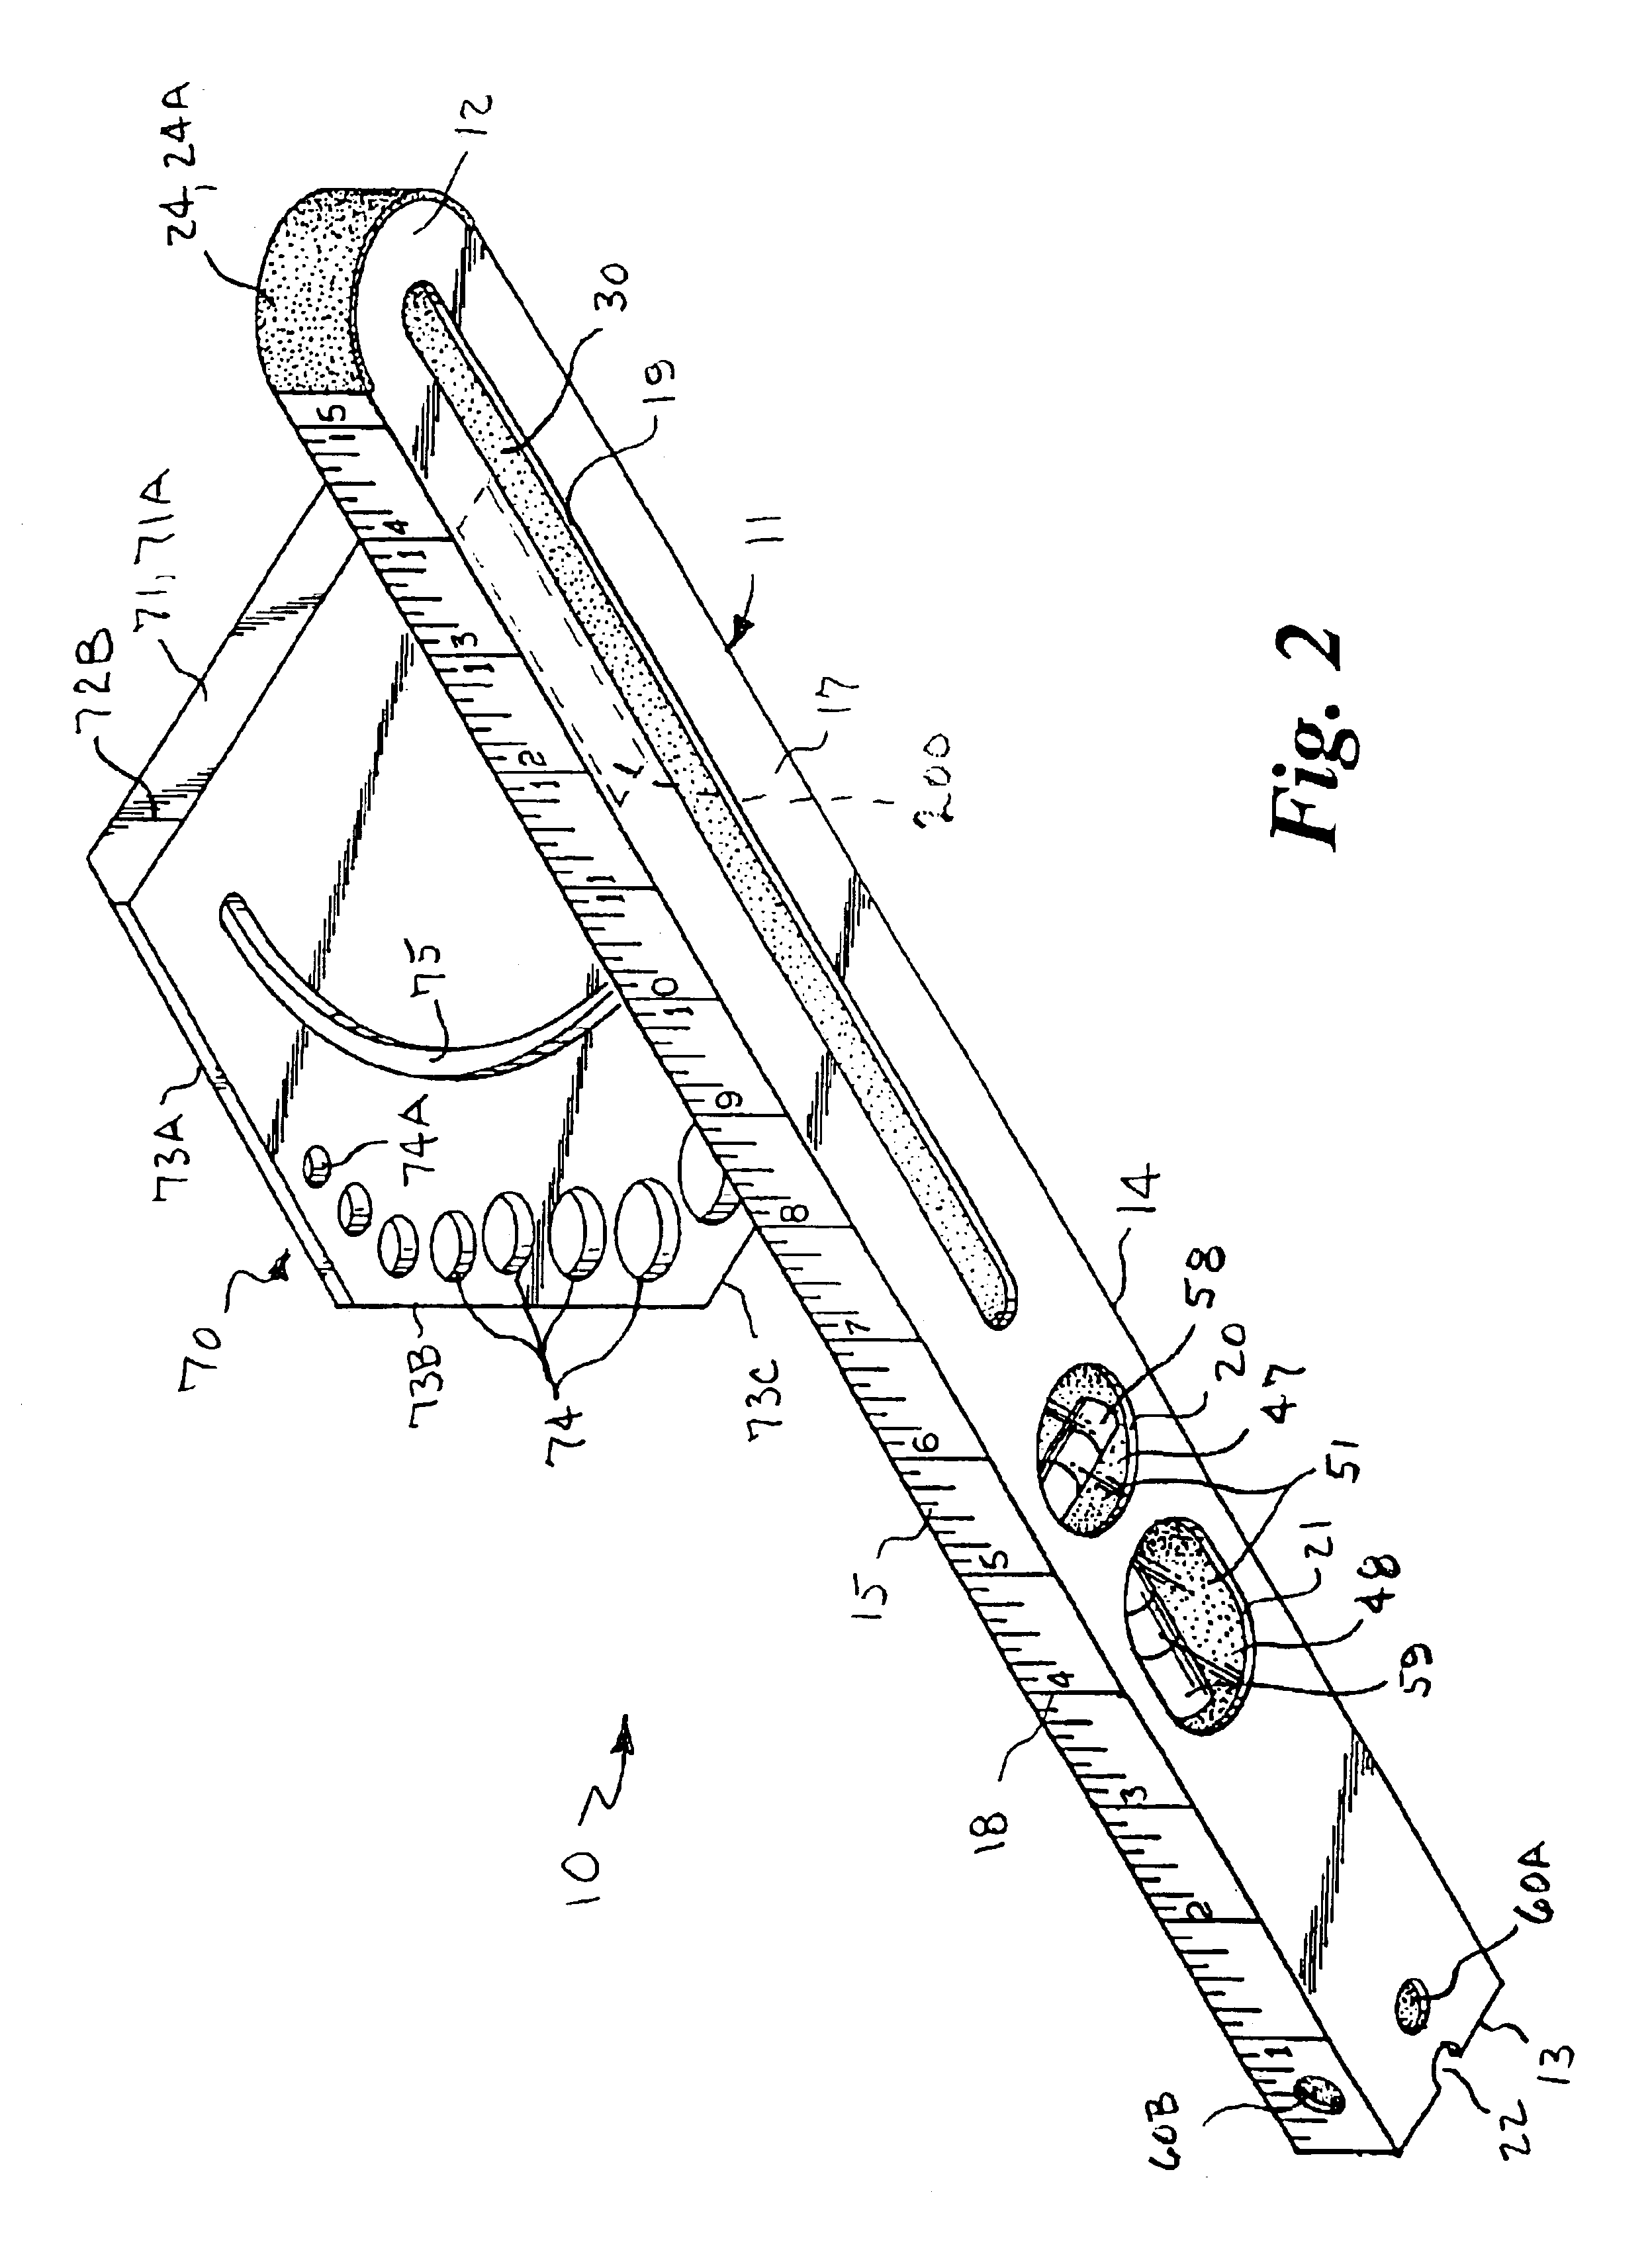 Multi-function layout square with laser